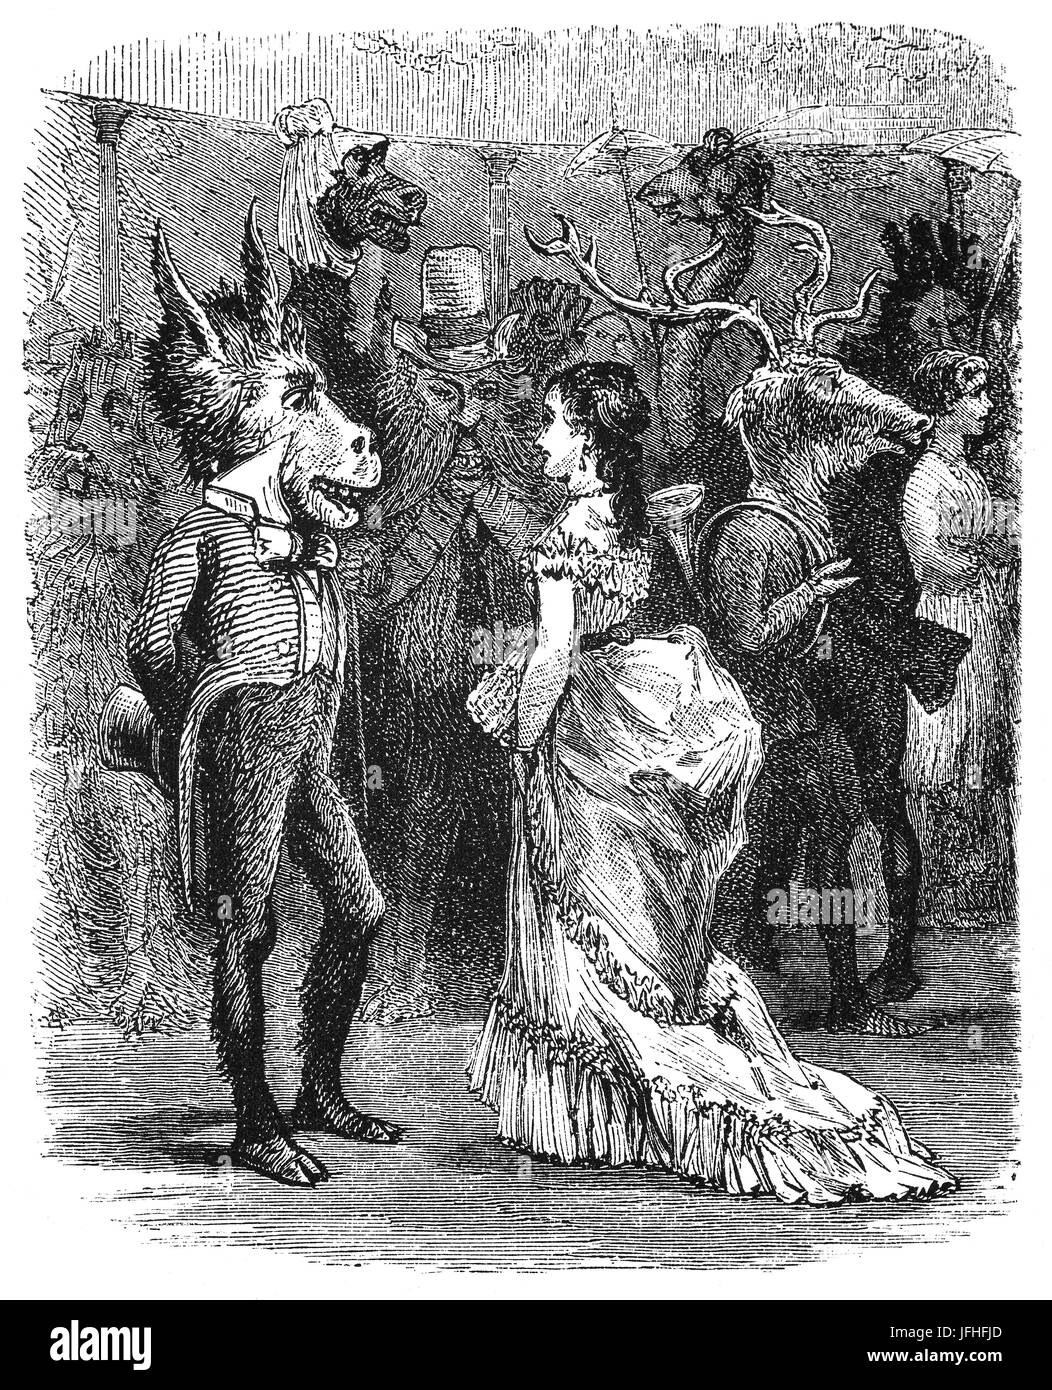 1879: A group of party-goers during Mardi Gras Carnival, New Orleans, Louisiana, United States of America Stock Photo